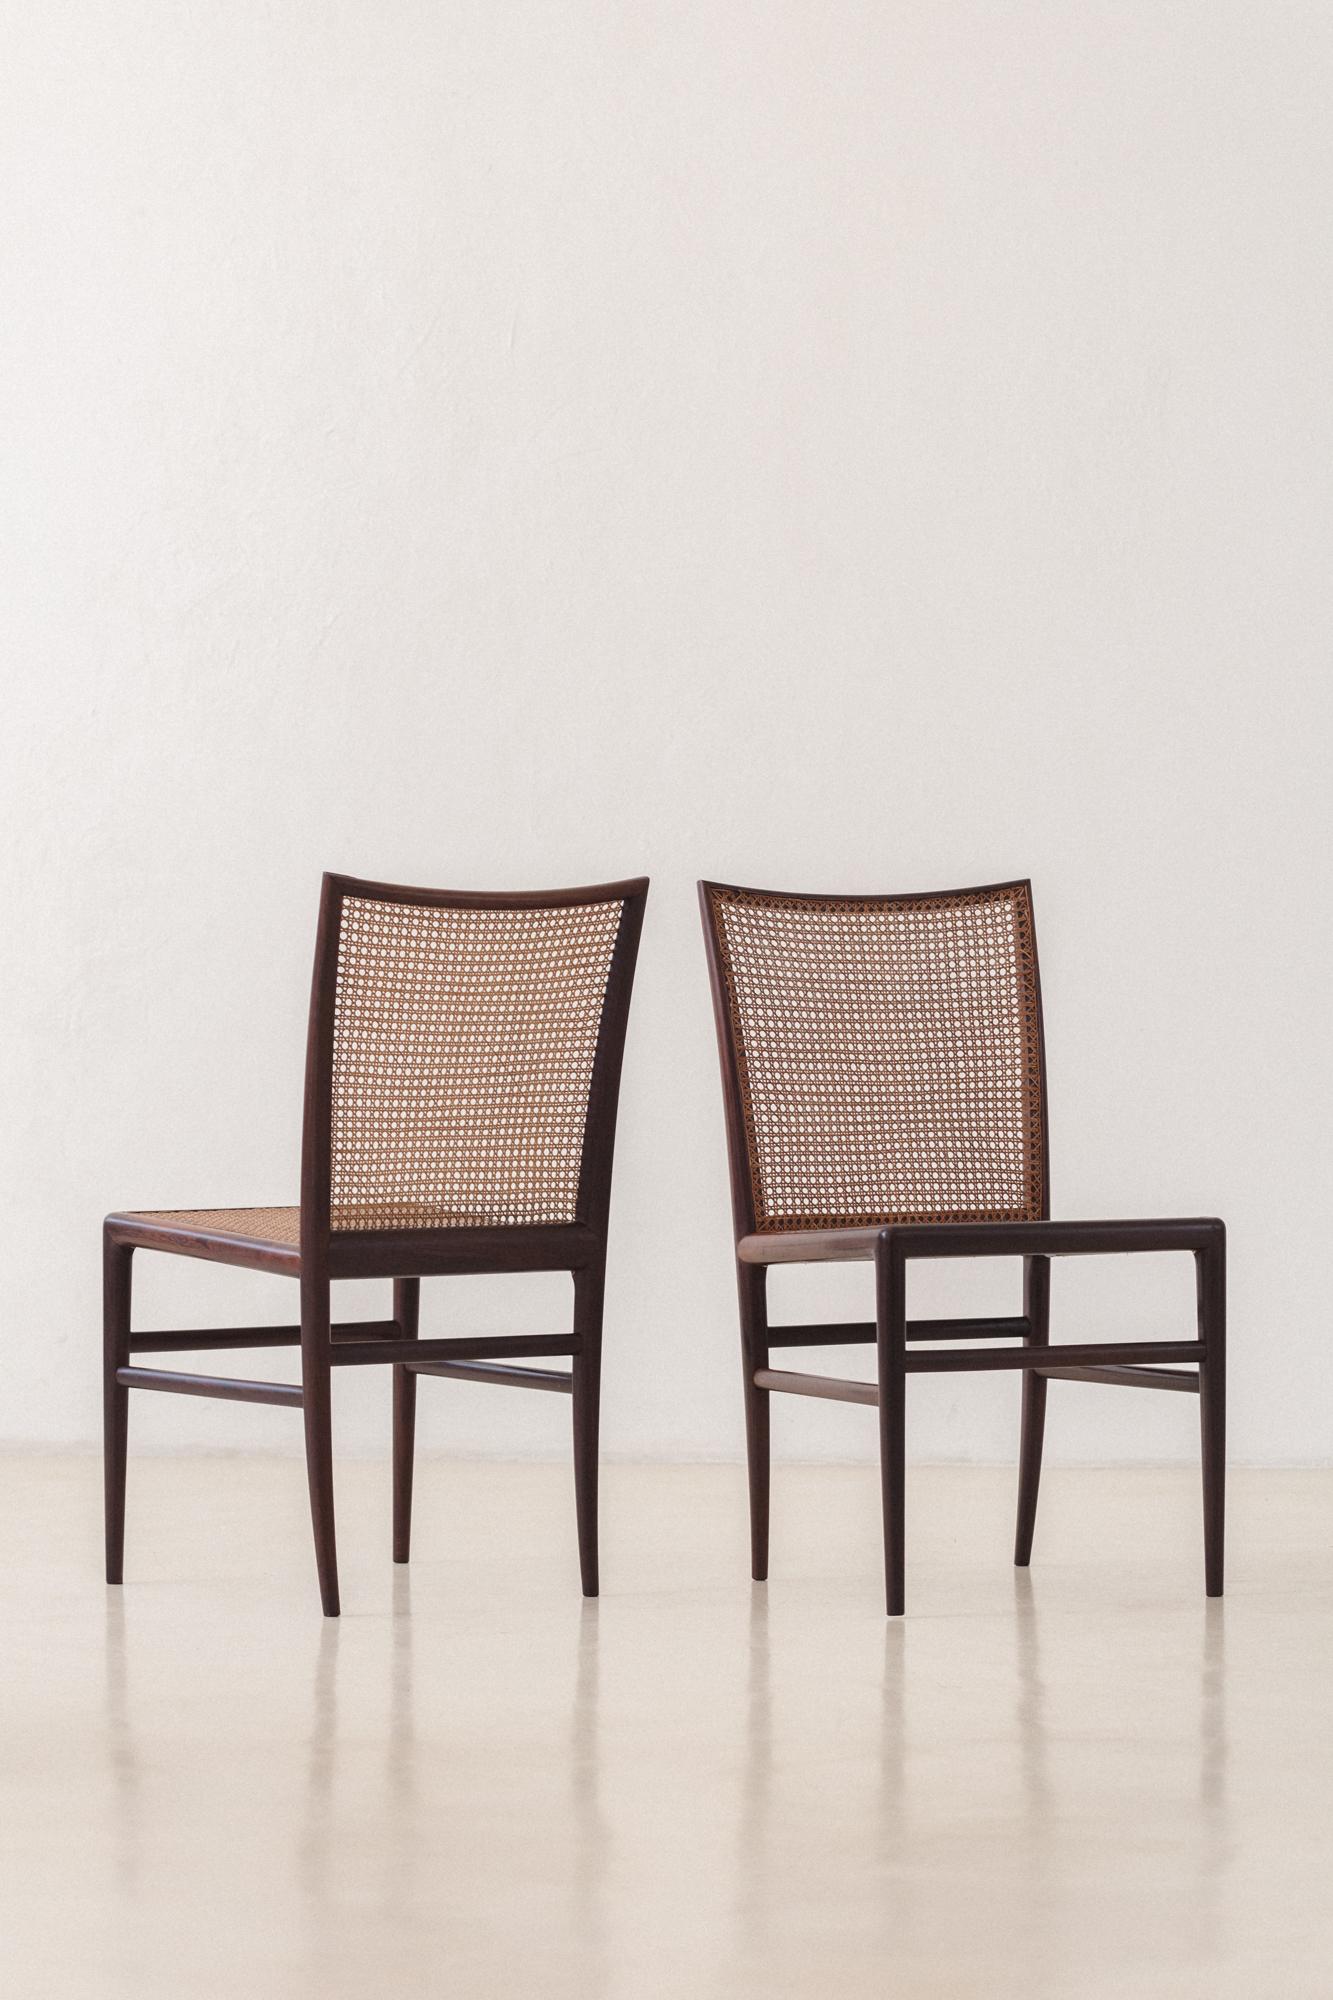 Set of 8 Rosewood Cane Chairs, Branco & Preto, 1952, Brazilian Midcentury For Sale 1